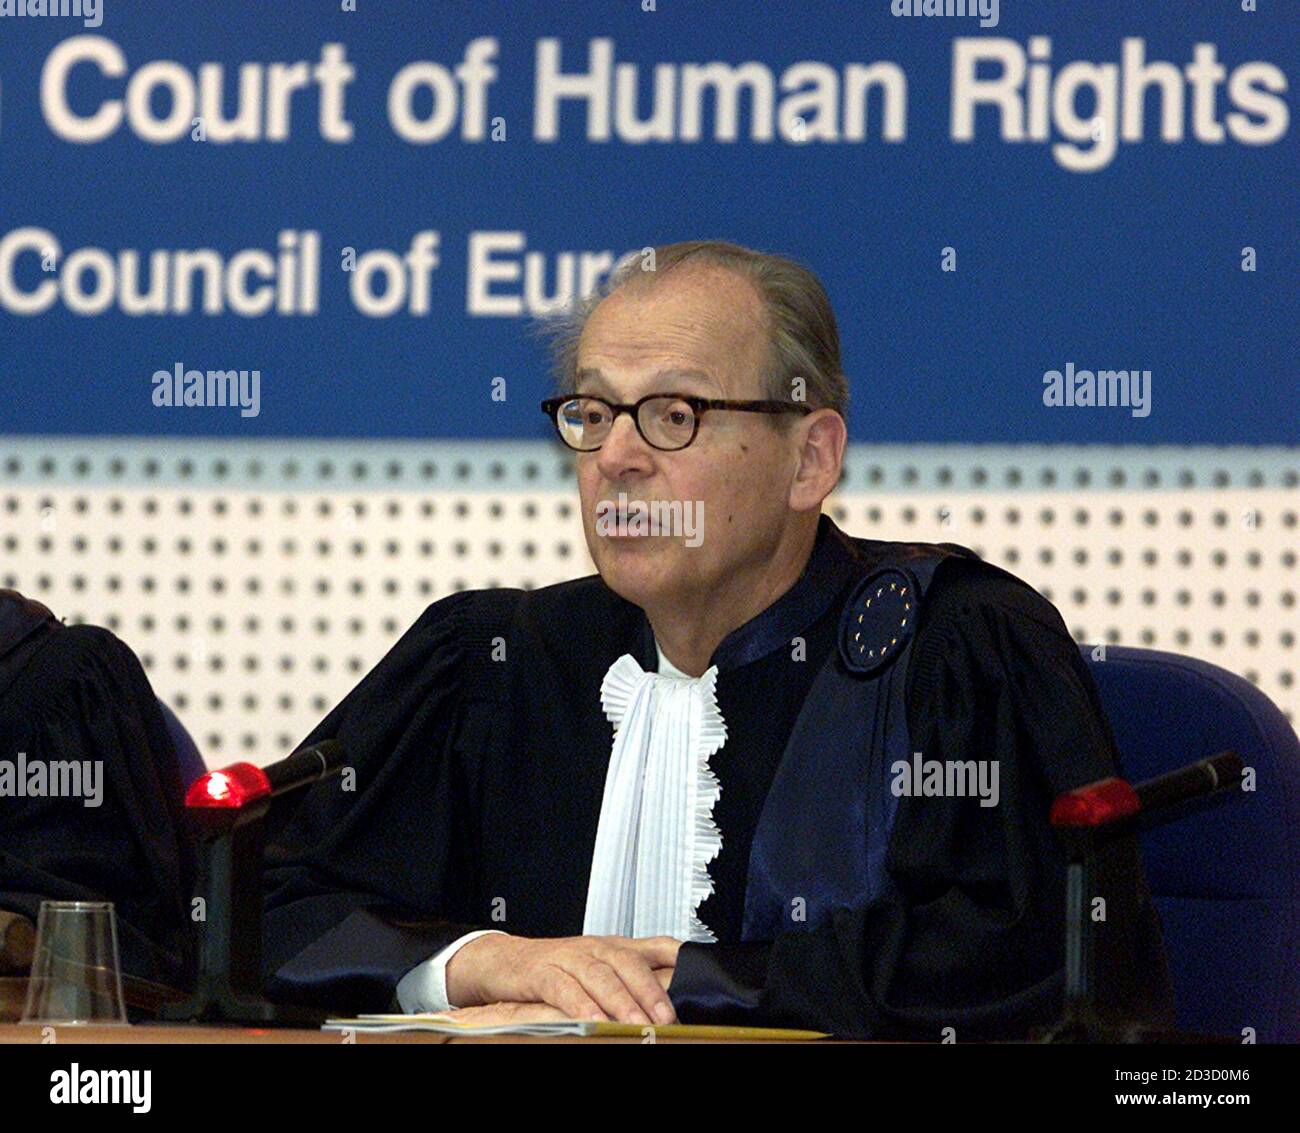 SWISS PRESIDENT OF STRASBOURG'S HUMAN RIGHTS COURT LUZUIS WILHDABER DISPENSES THE JUDGMENT IN EST GERMAN LAST COMMUNIST LEADER EGON KRENZ.   Swiss President of the European Court of Human Rights Luzius Wildhaber dispenses the judgements in the case of East Germany's last Communist leader Egon Krenz and three other former East German communists in Strasbourg March 22, 2001. The European Court of Human Rights rejected Krenz's appeal against manslaughter conviction for cold war-era shootings along the Berlin Wall and said he should serve his six and a half years jail sentence. Stock Photo